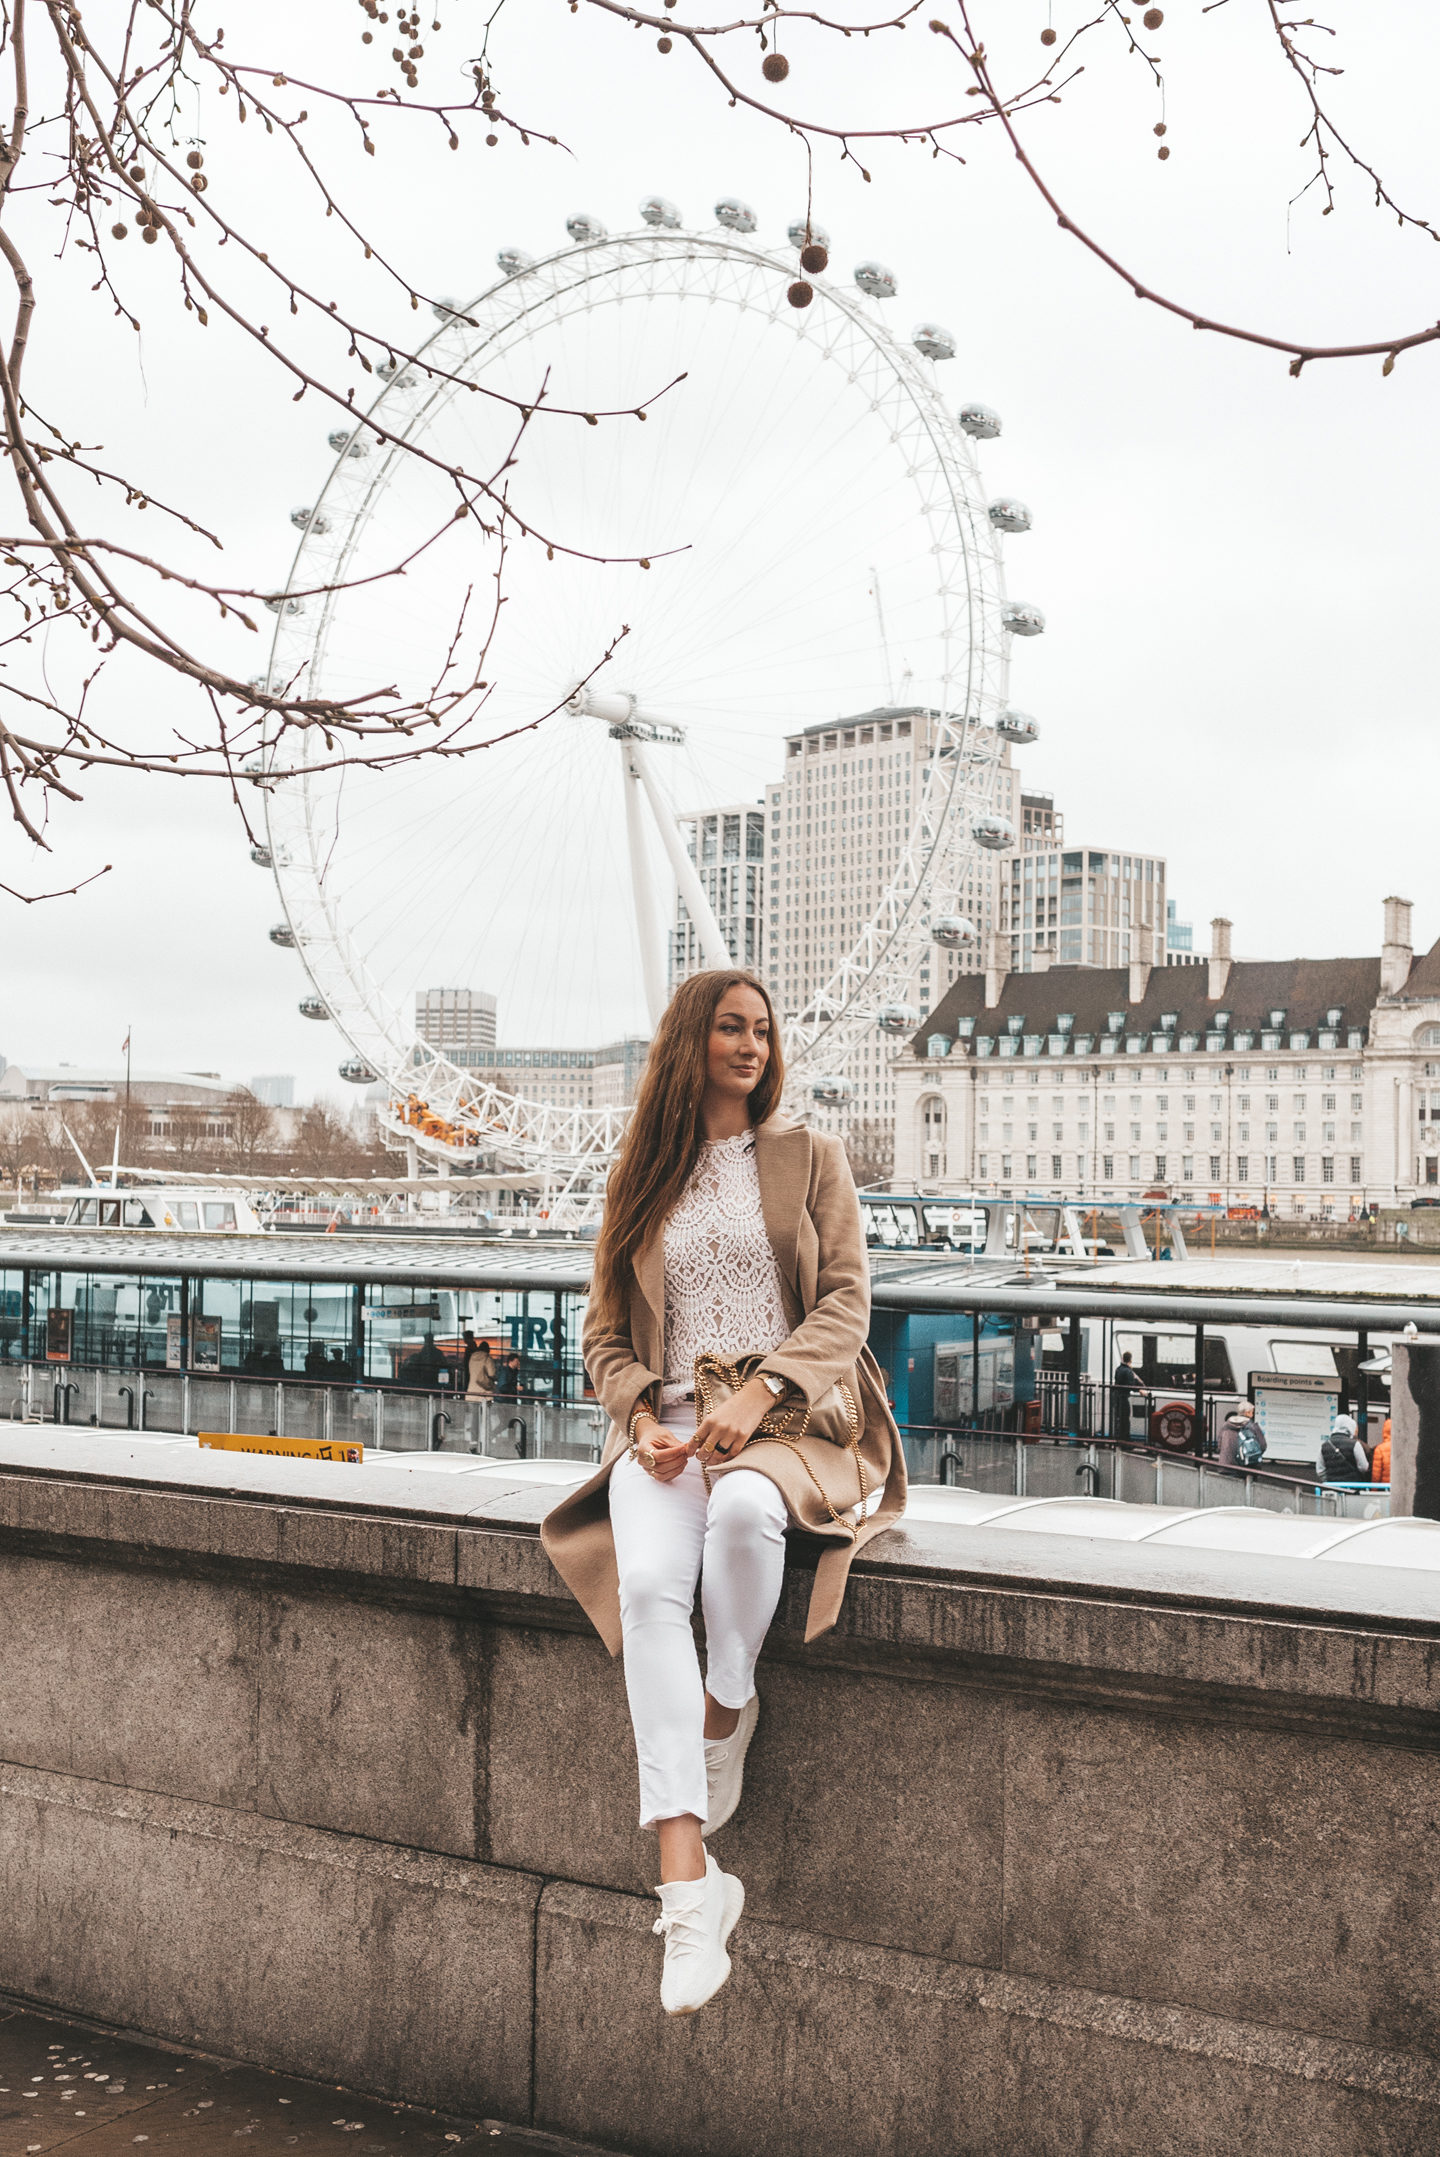 a life update linda's wholesome life Londen city trip